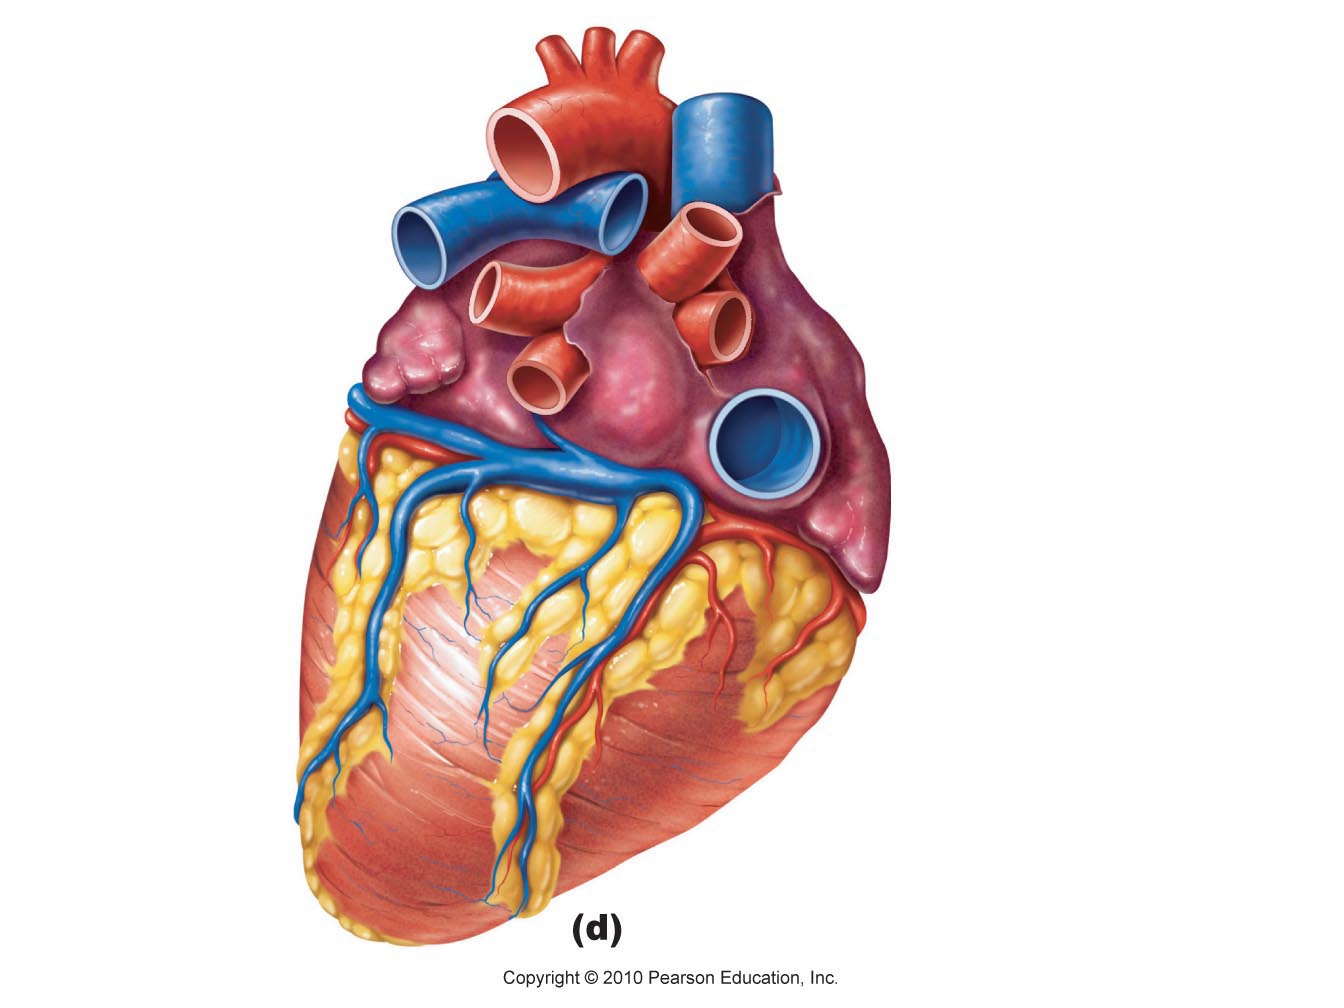 Heart Diagram Unlabeled   Free Cliparts That You Can Download To You